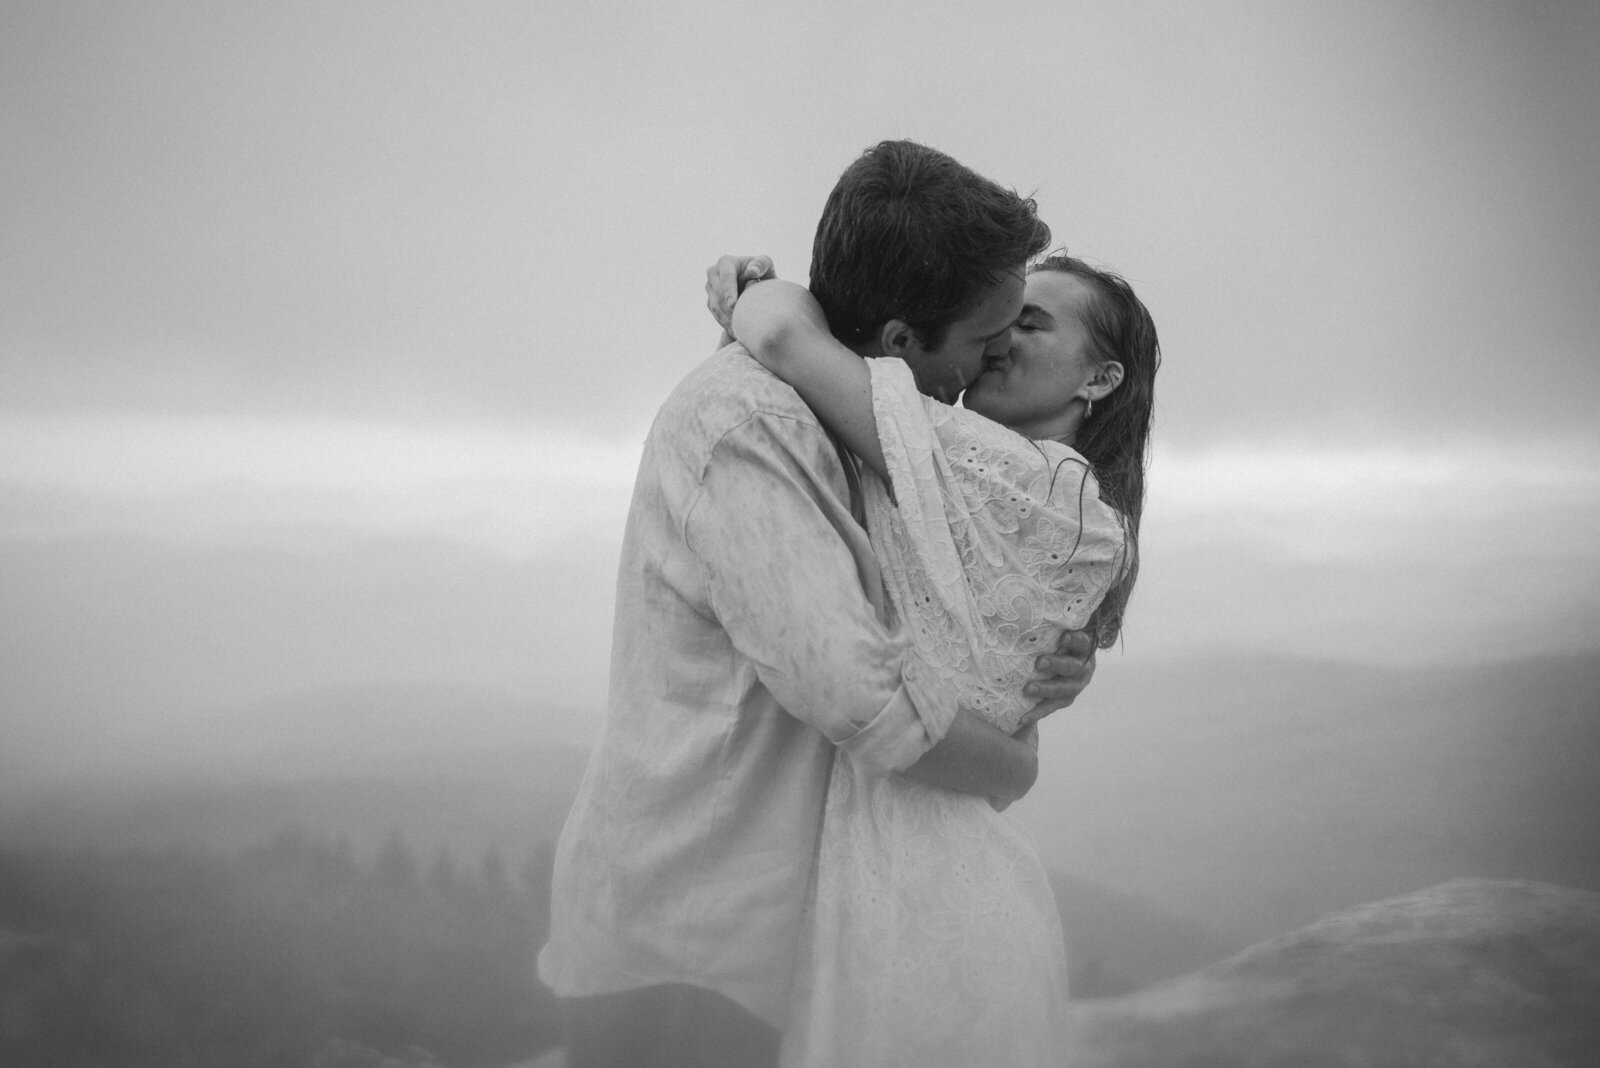 An engaged couple kisses in the rain in the Great Smoky Mountains near Asheville.